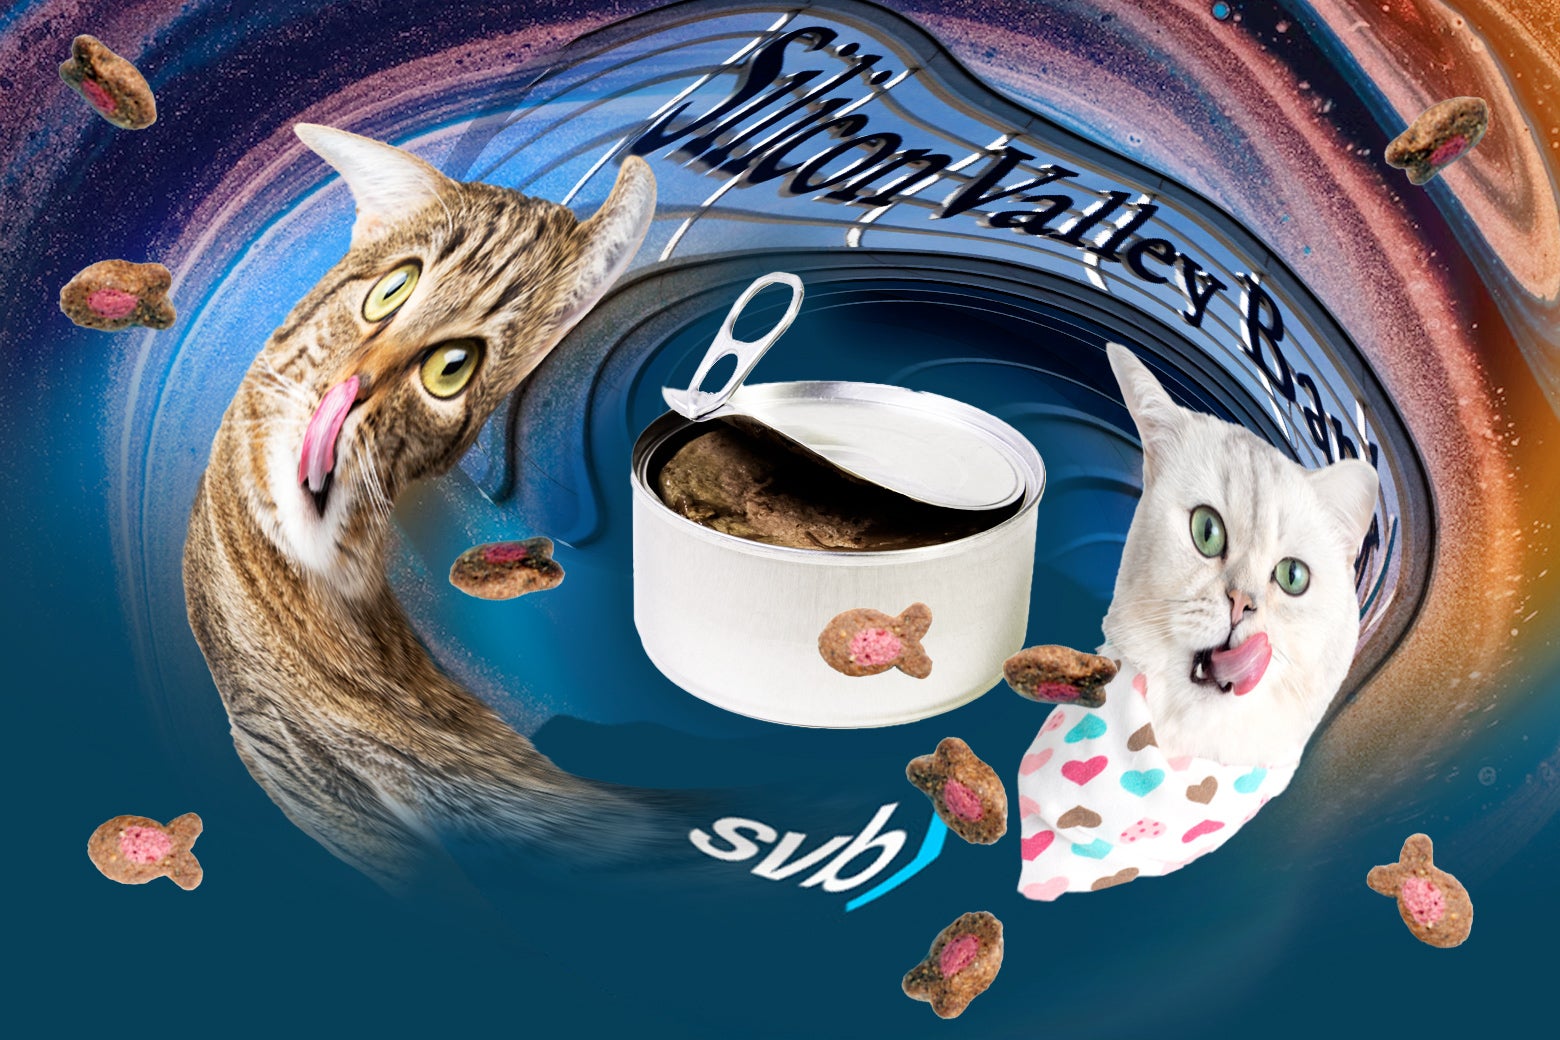 A Silicon Valley Bank branch and some kitties being subsumed by a vortex. Trippy!